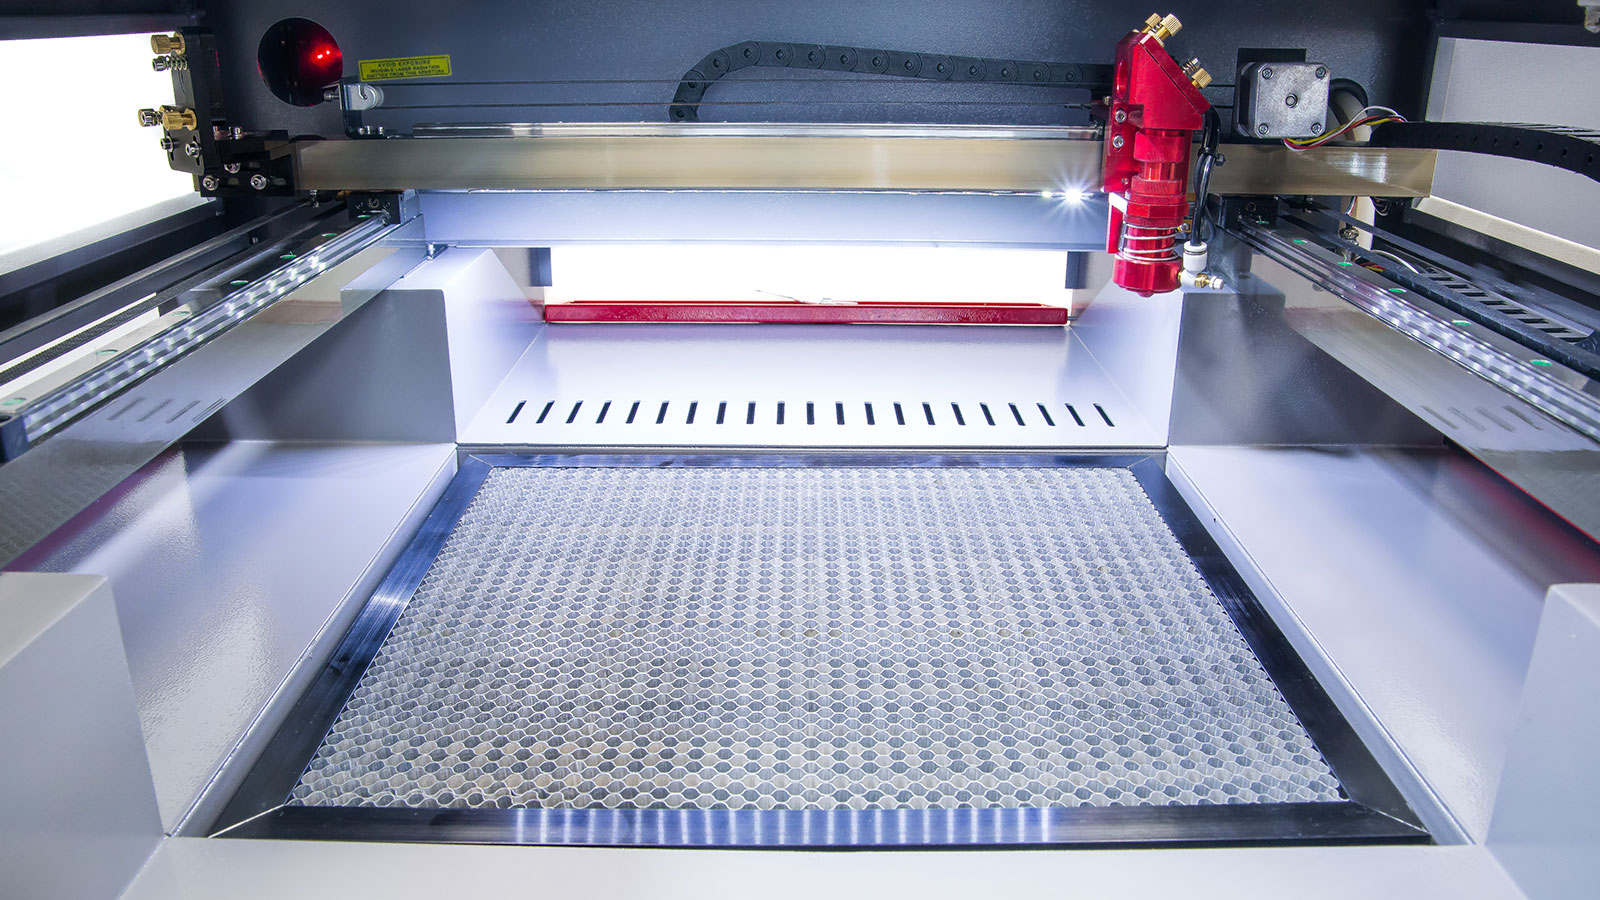 LS-1420 Co2 Laser Cutter and Engraver - Boss Laser